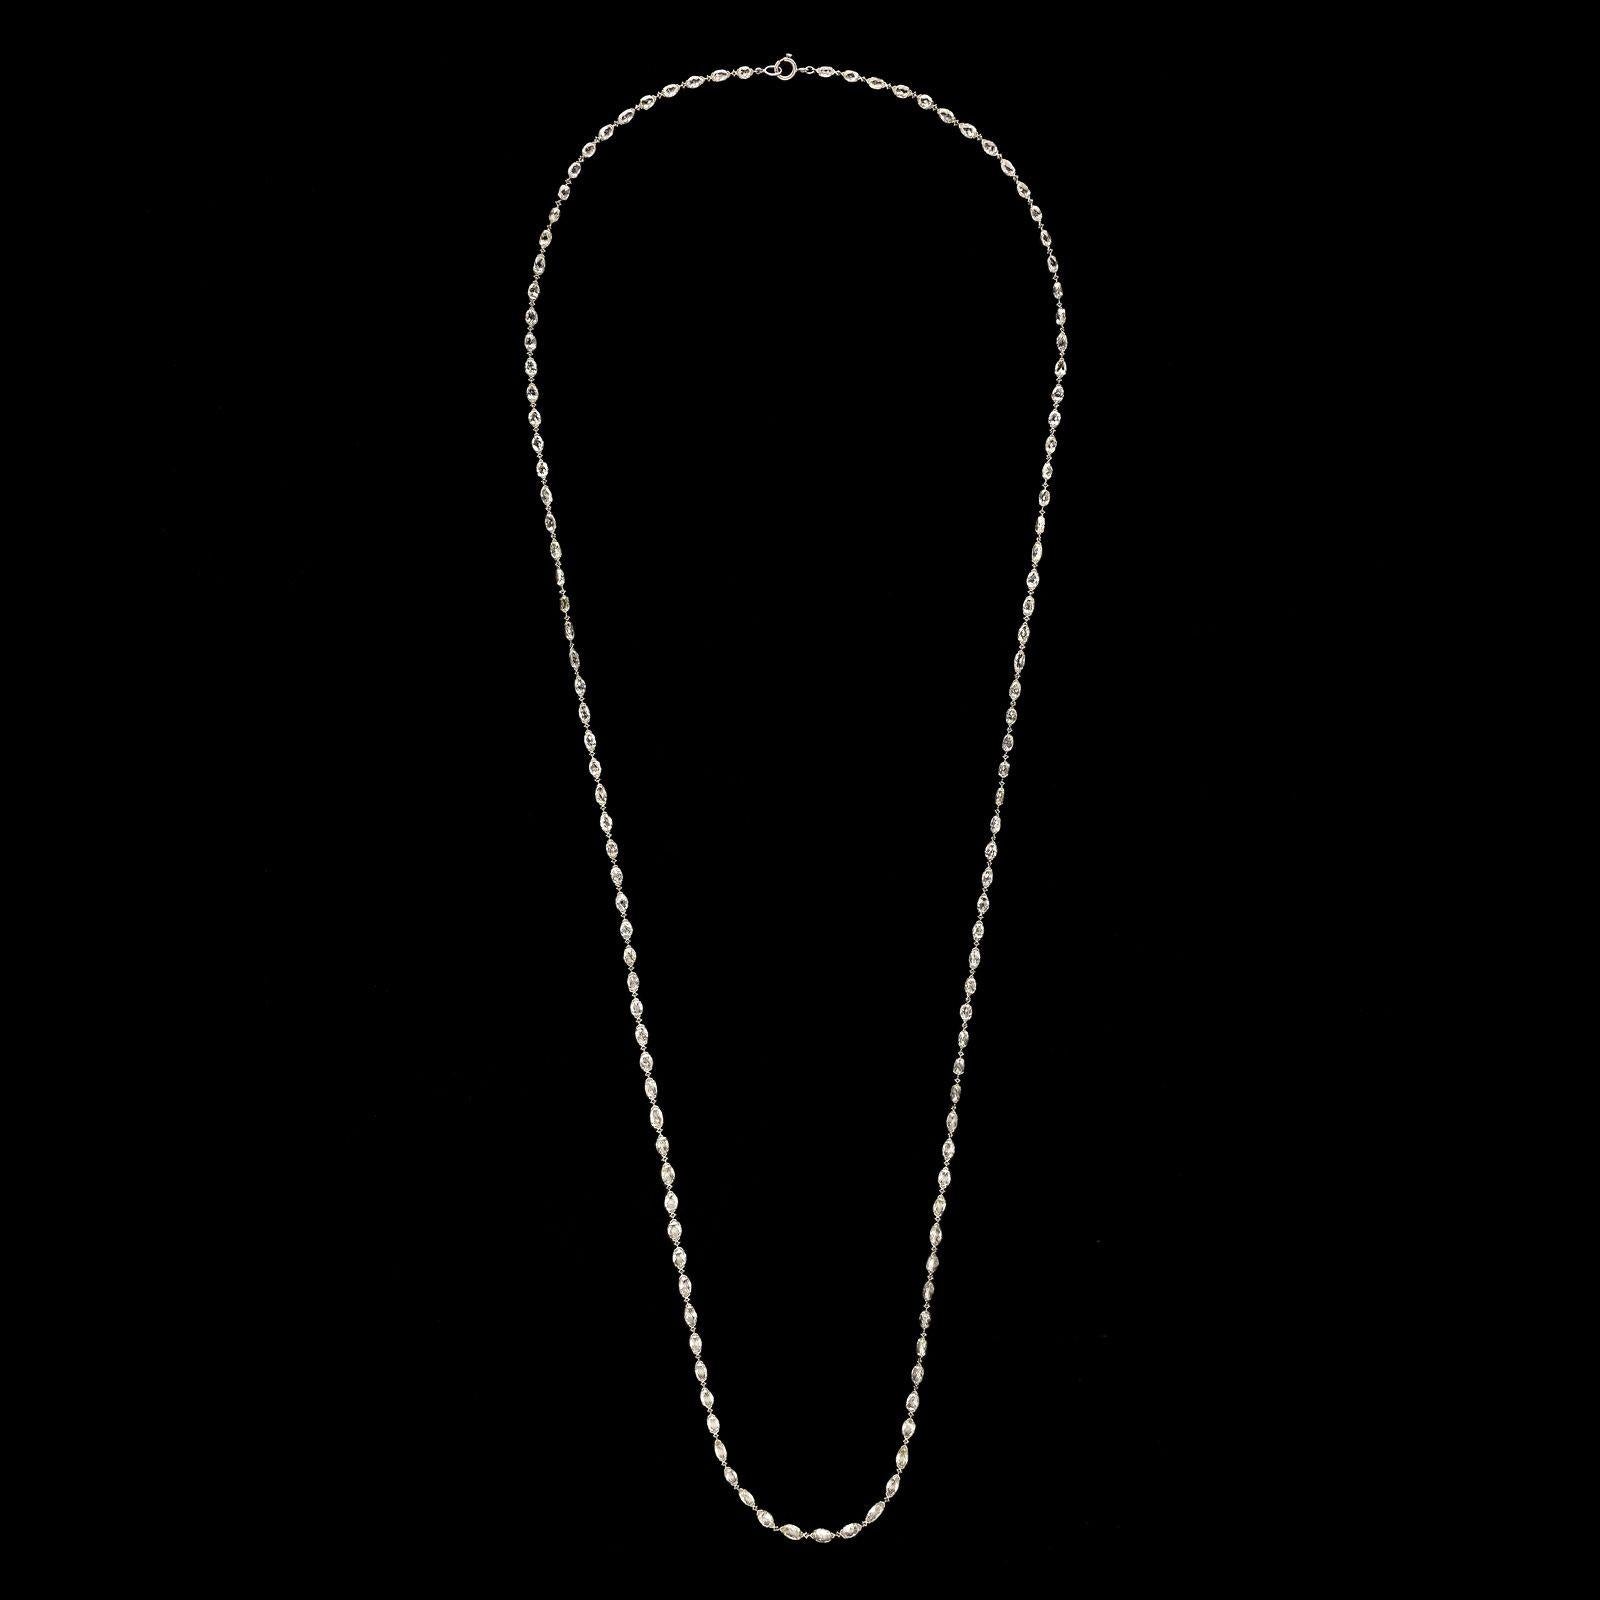 A beautiful diamond and platinum long necklace by Hancocks, the 24